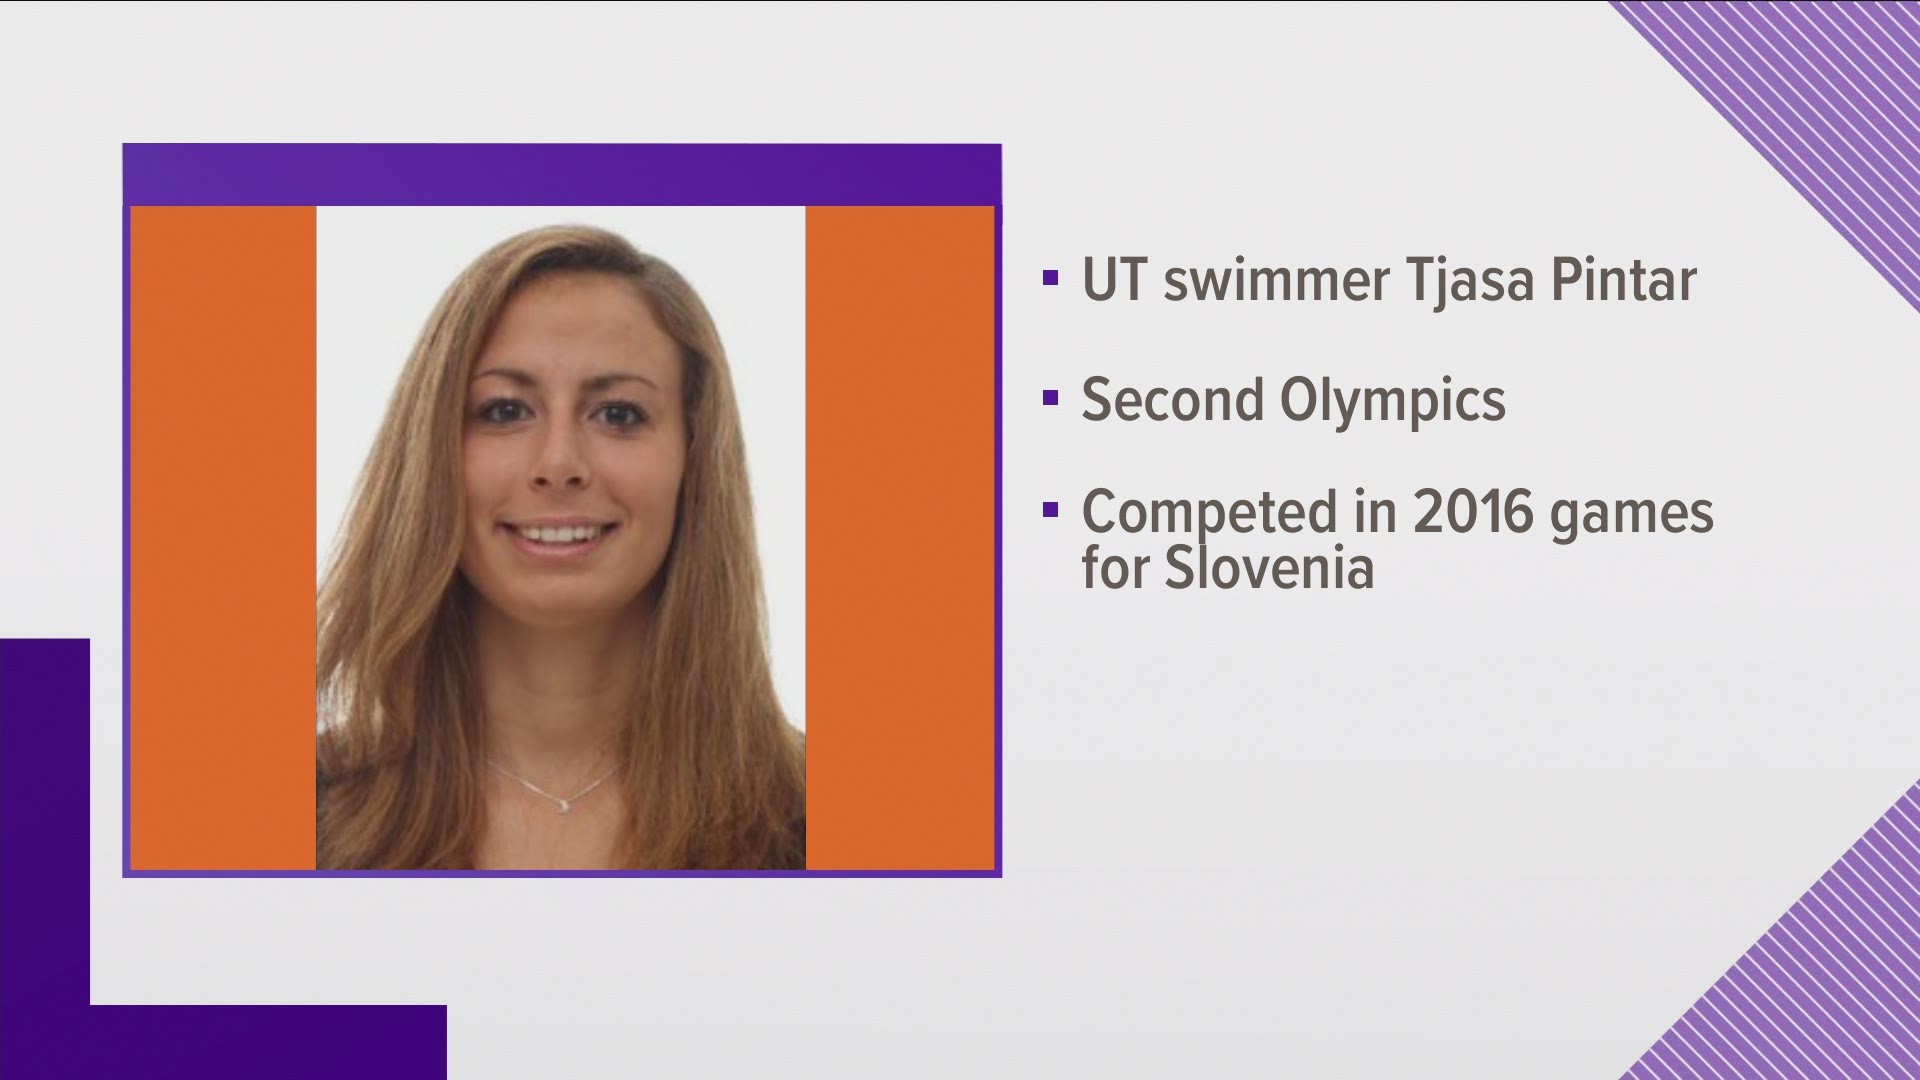 Over the weekend, a UT swimmer also joins that list.